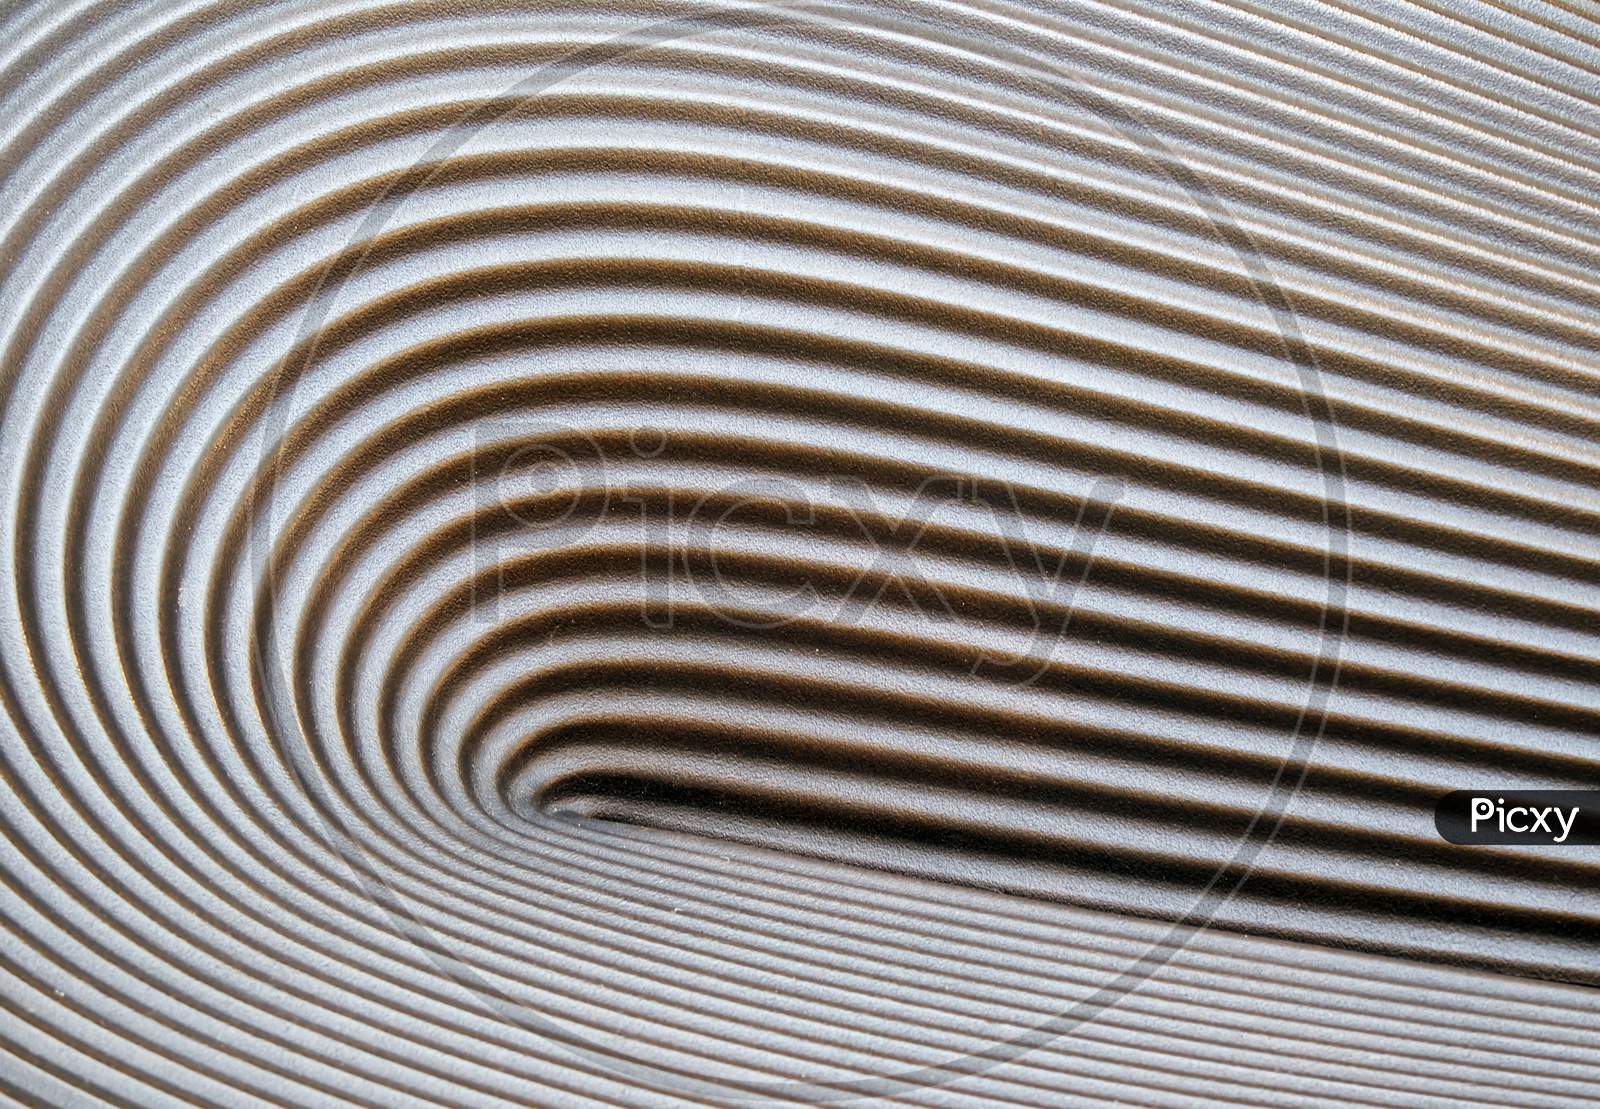 Parallels lines pattern background